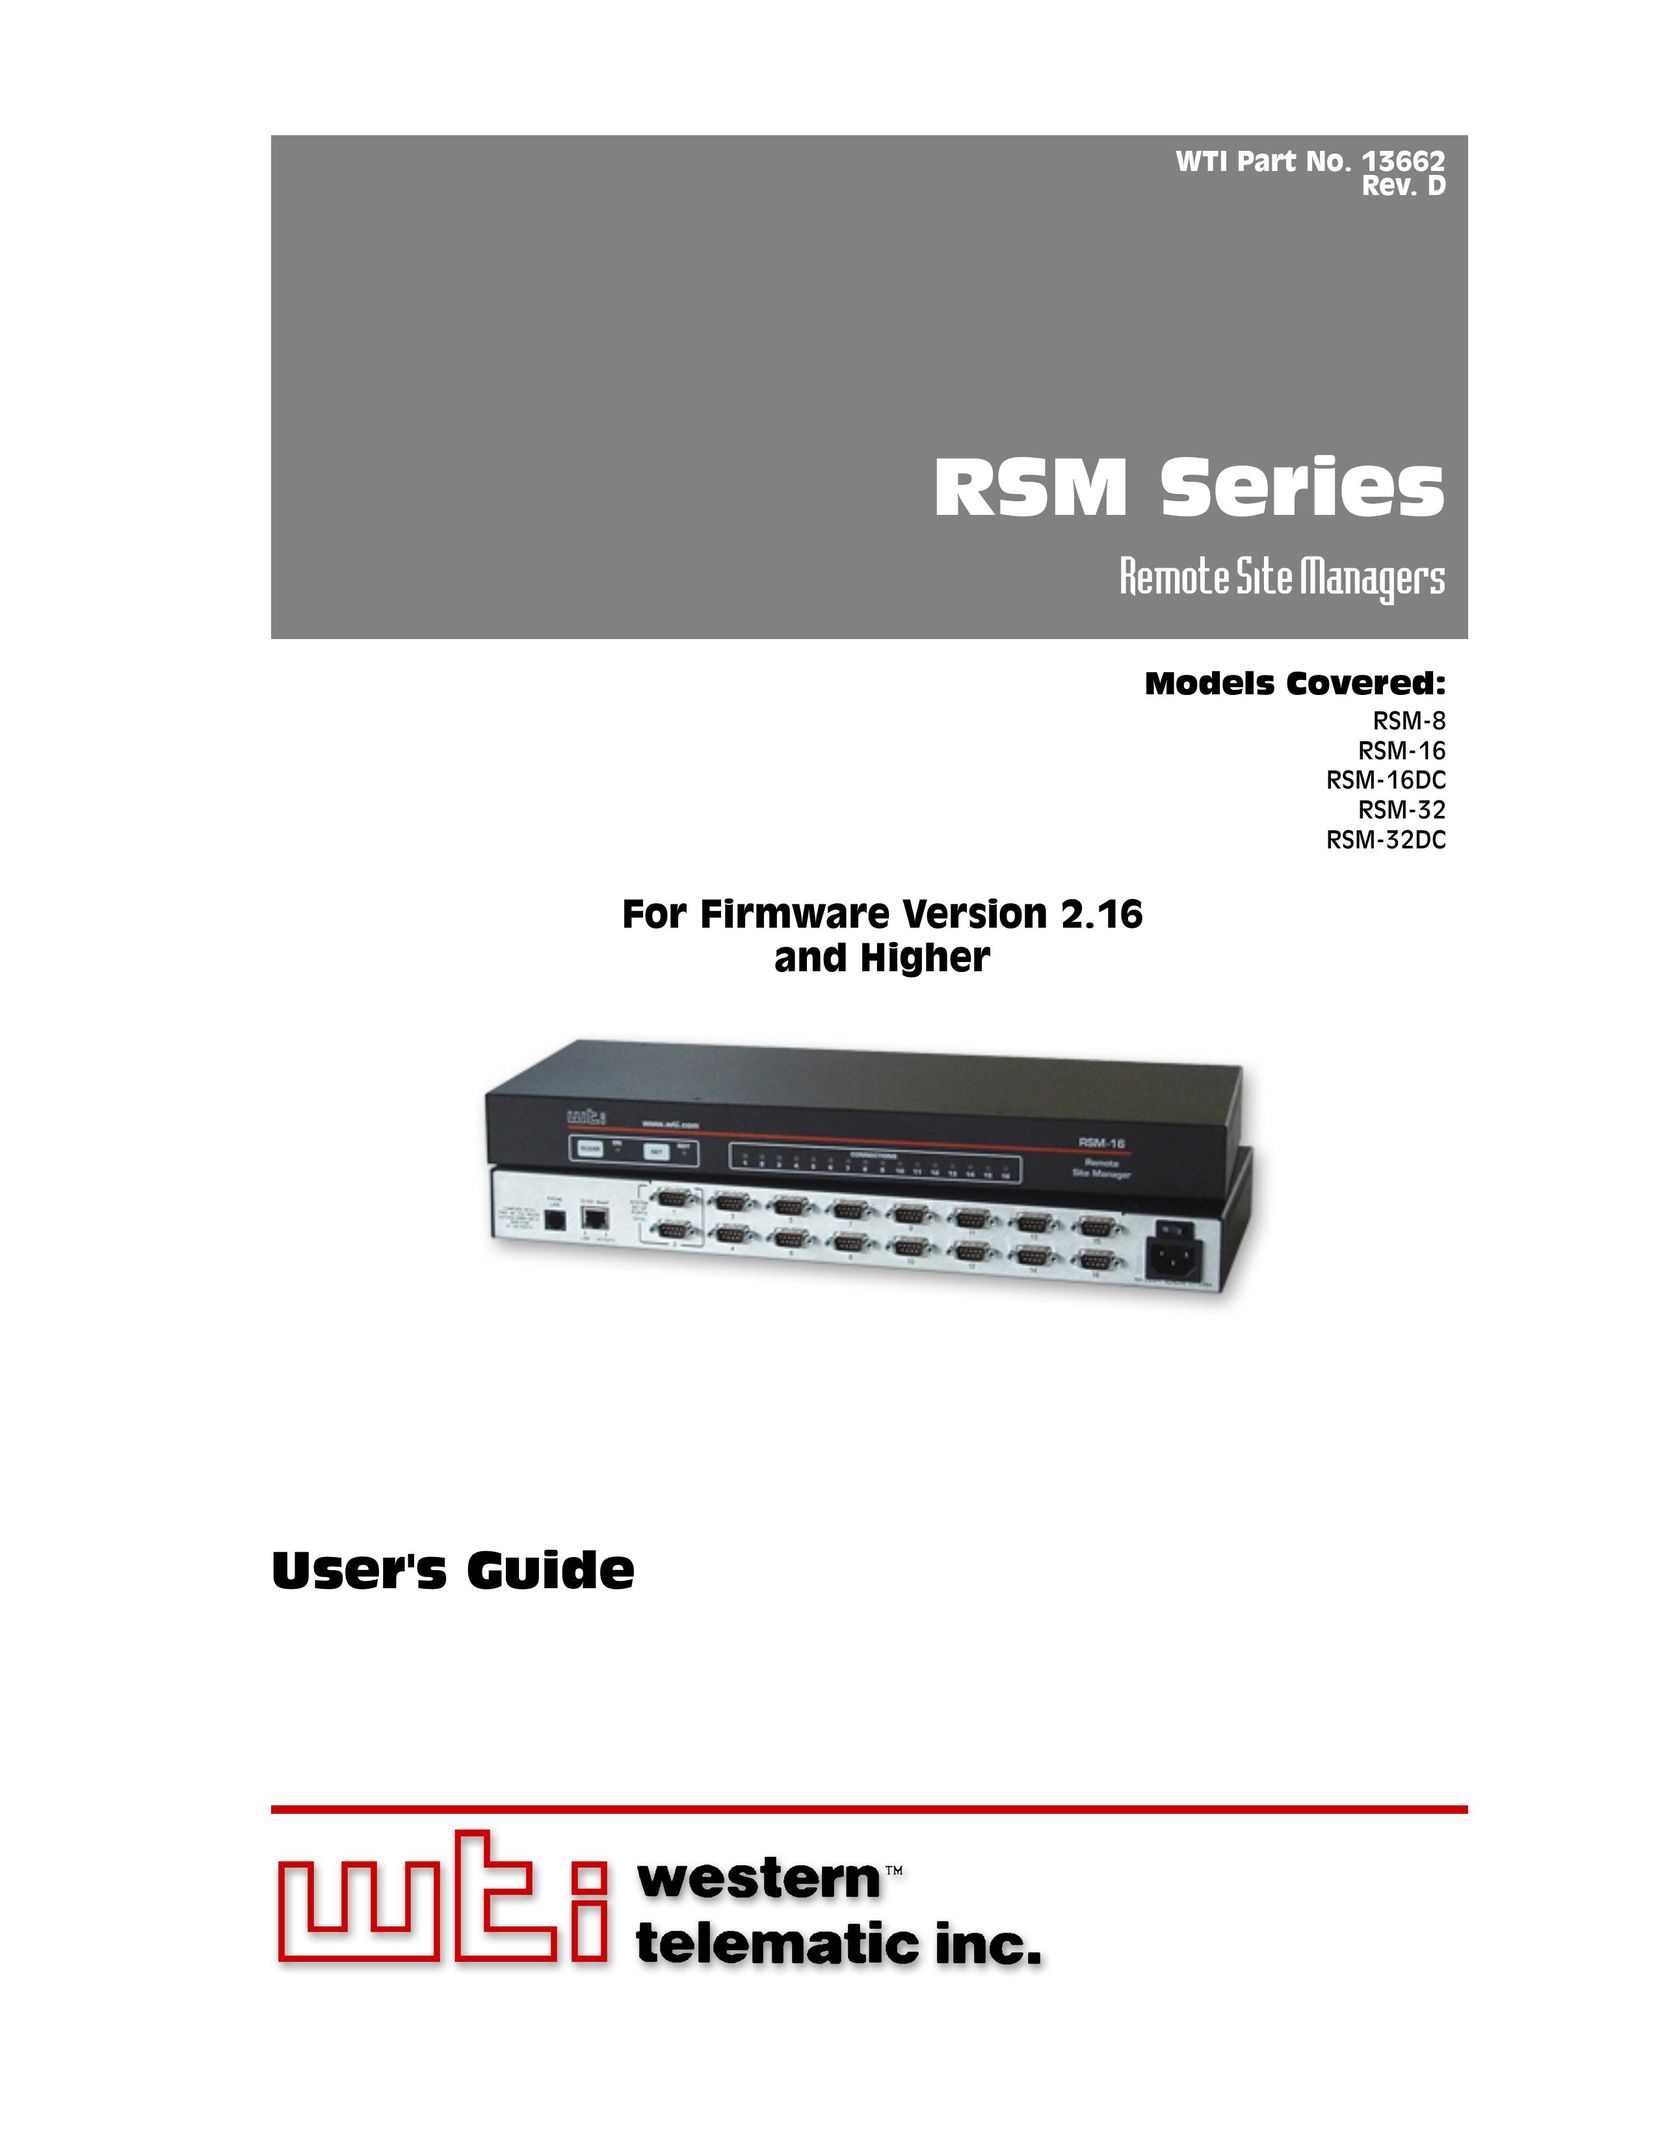 Western Telematic RSM-16DC Video Gaming Accessories User Manual (Page 1)